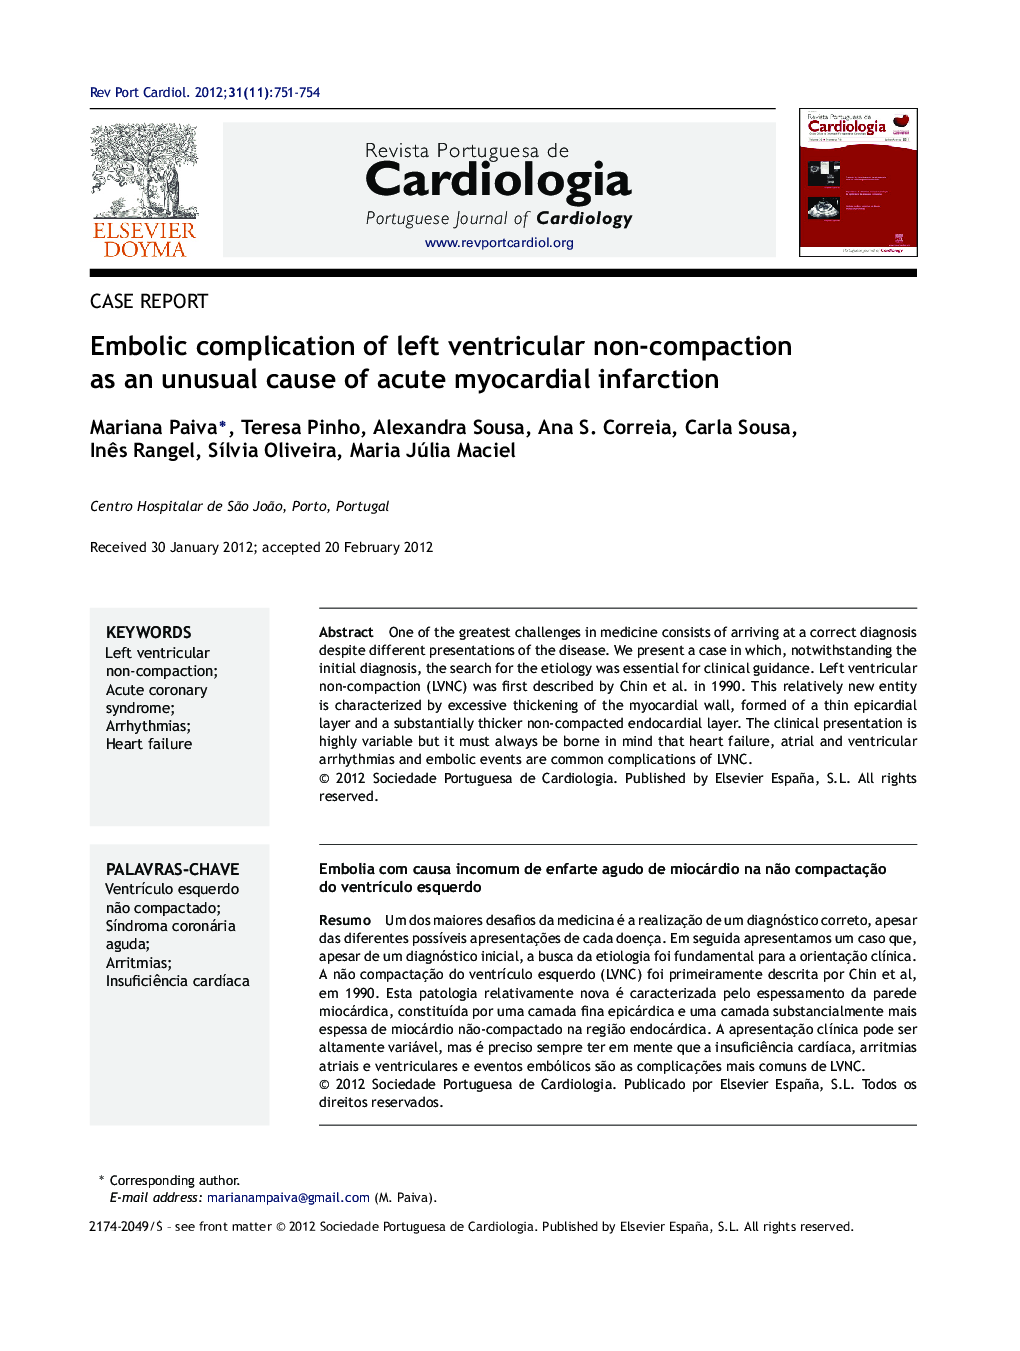 Embolic complication of left ventricular non-compaction as an unusual cause of acute myocardial infarction